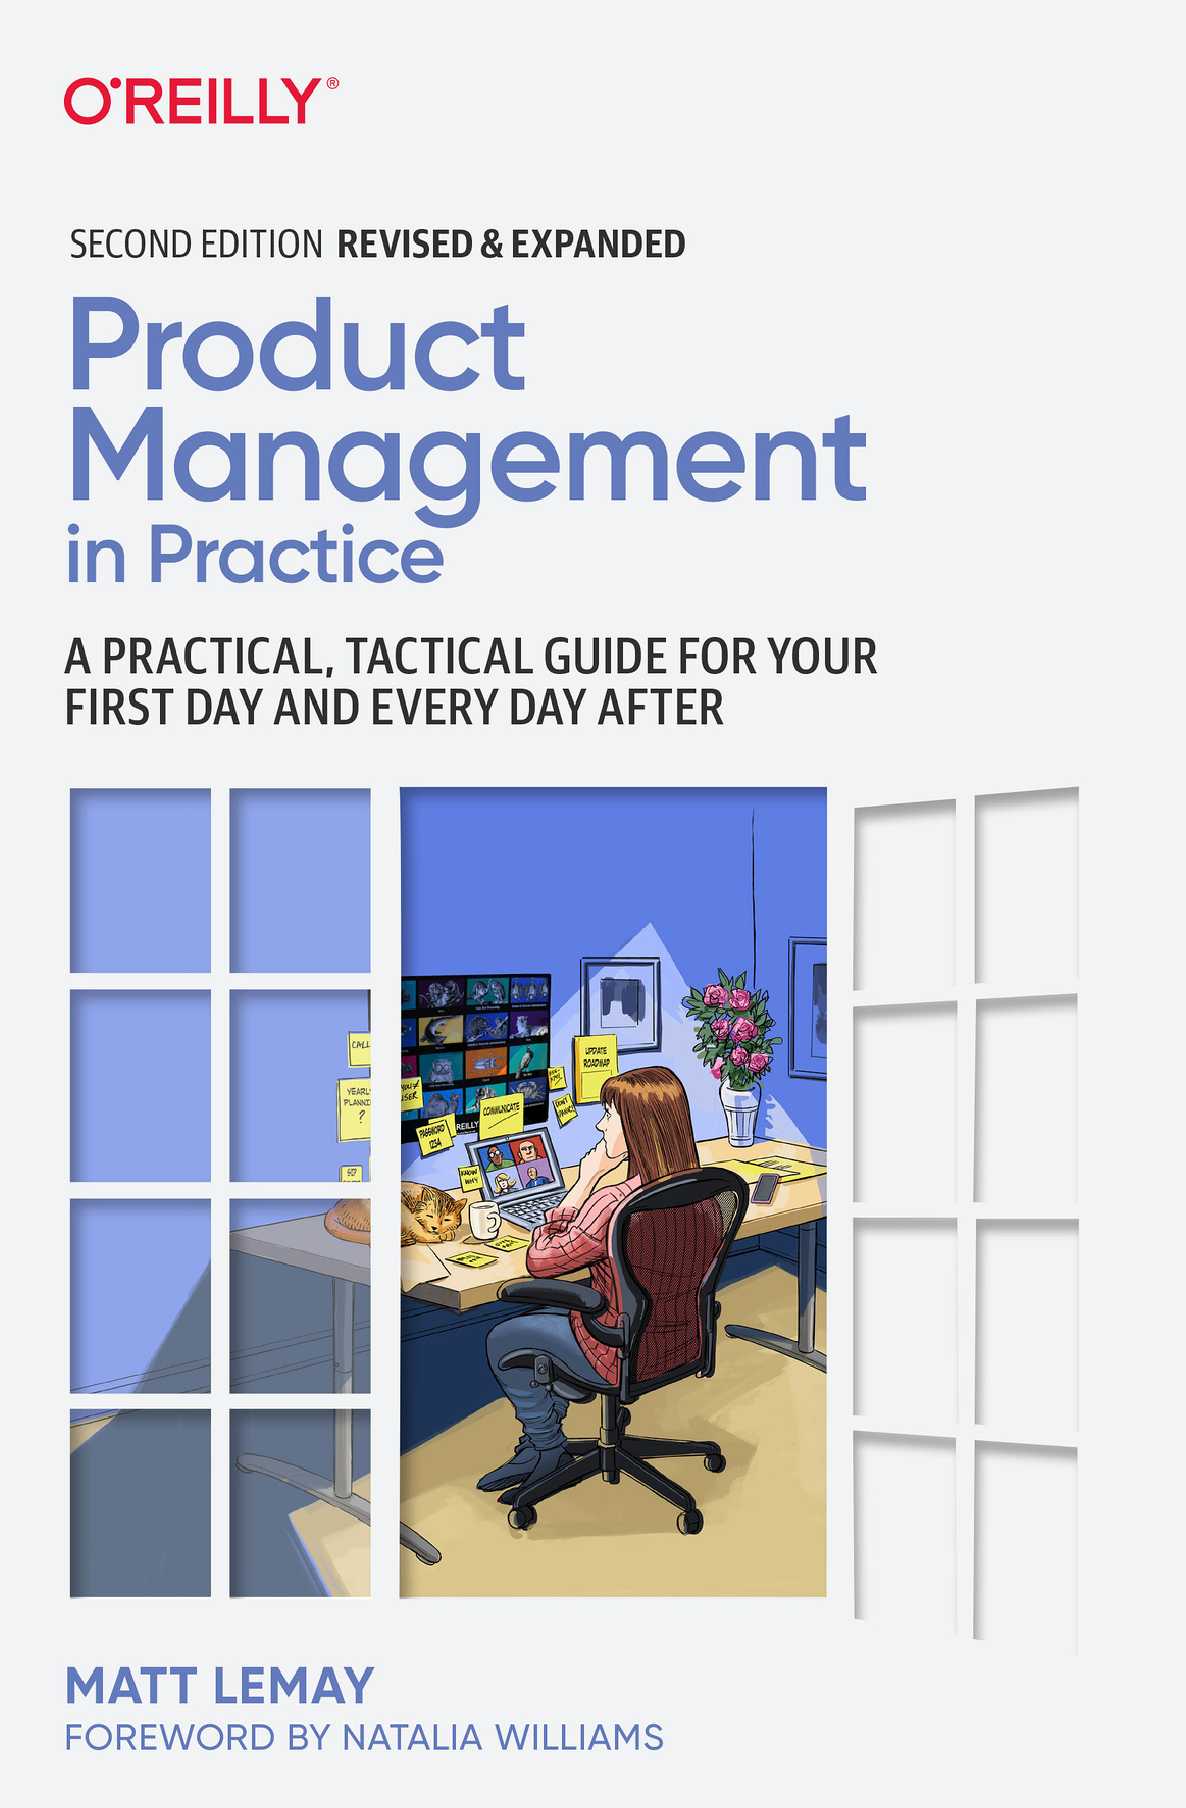 Product Management in Practice: A Practical Tactical Guide for Your First Day and Every Day After PDF